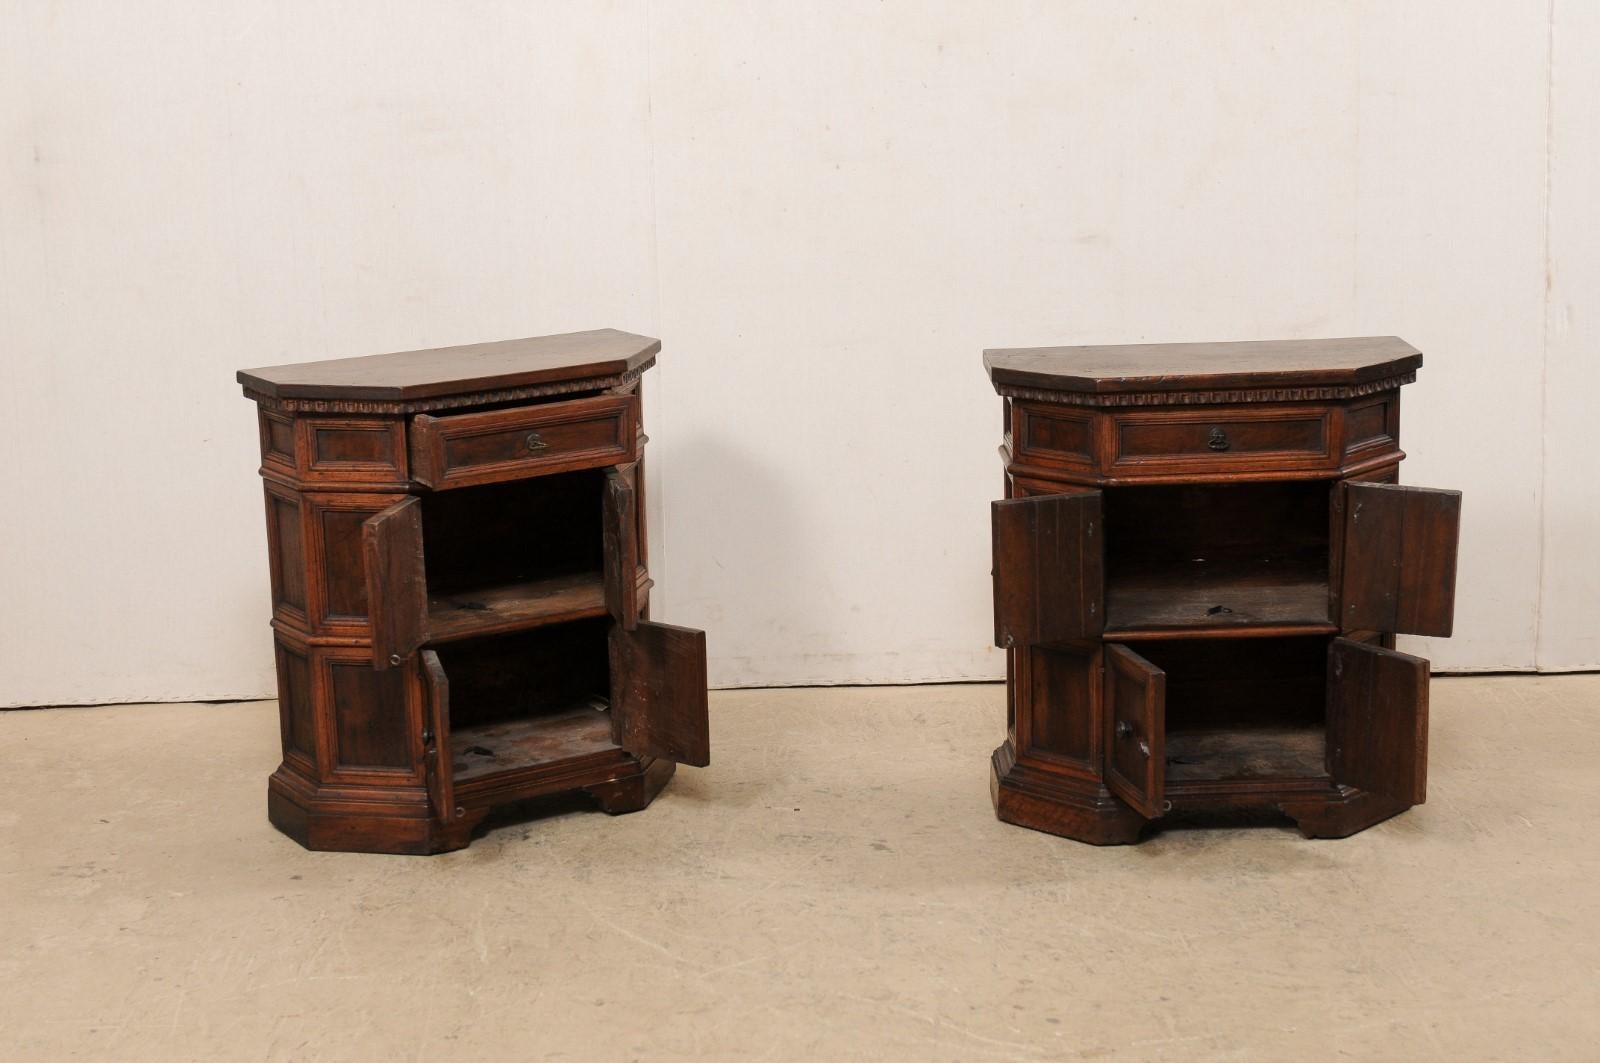 Italian Petite-Sized Paneled & Carved Console Cabinets, Early 19th Century 1